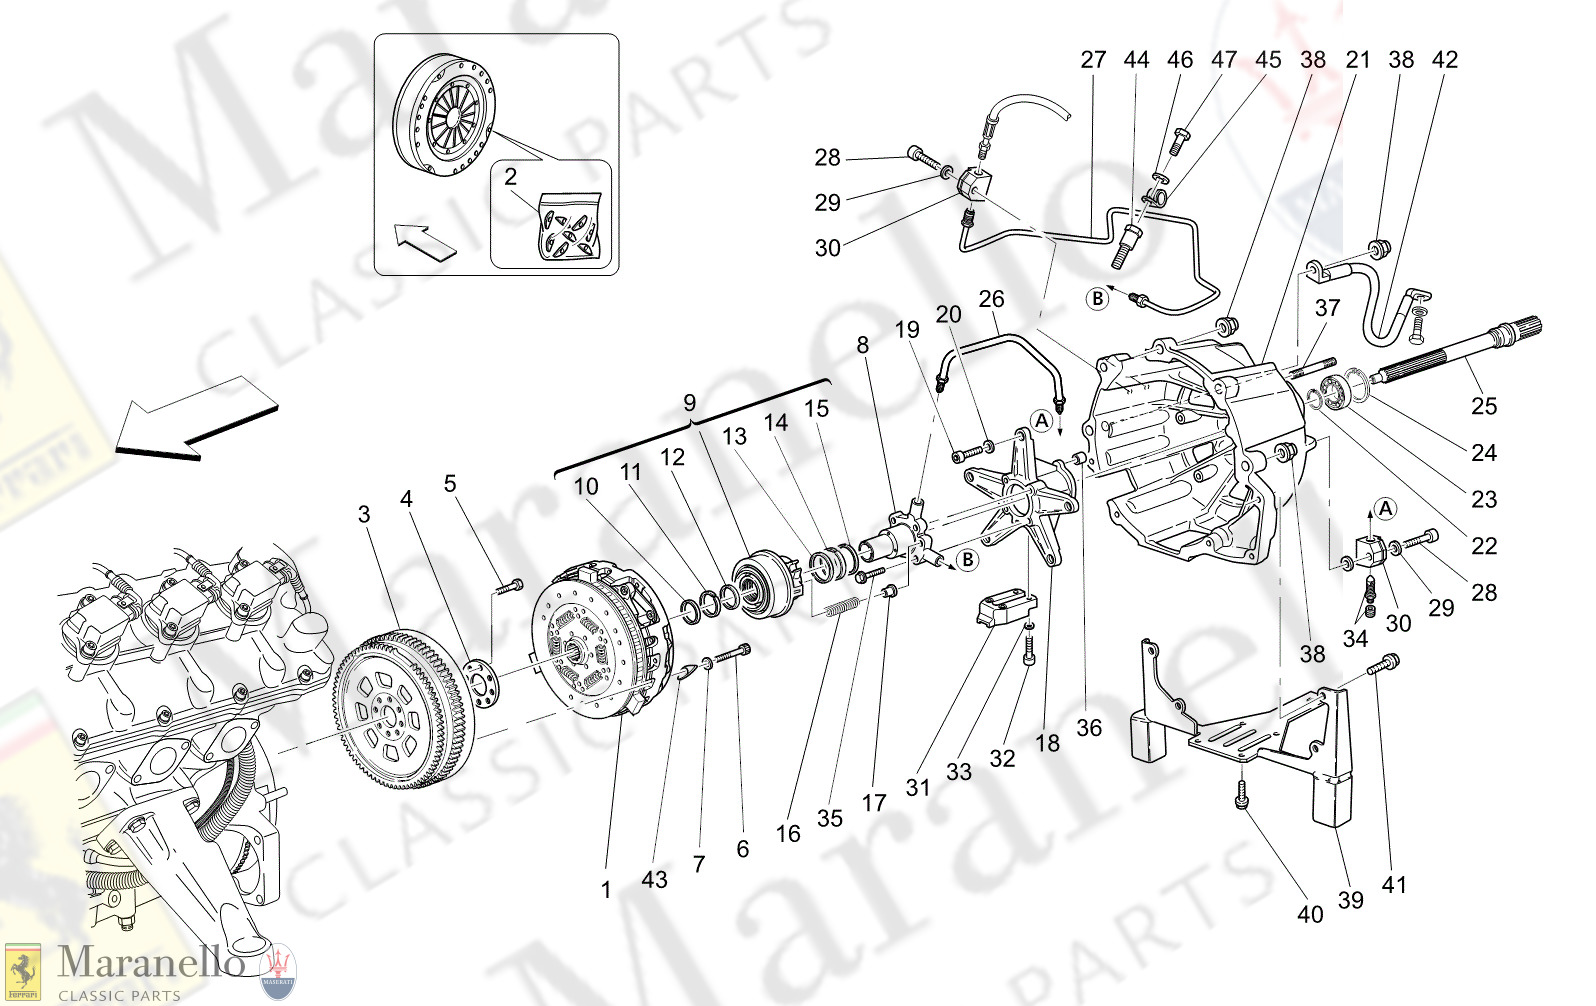 M2.10 - 14 - M210 - 14 Clutch Discs And Housing For Mechanical Gearbox